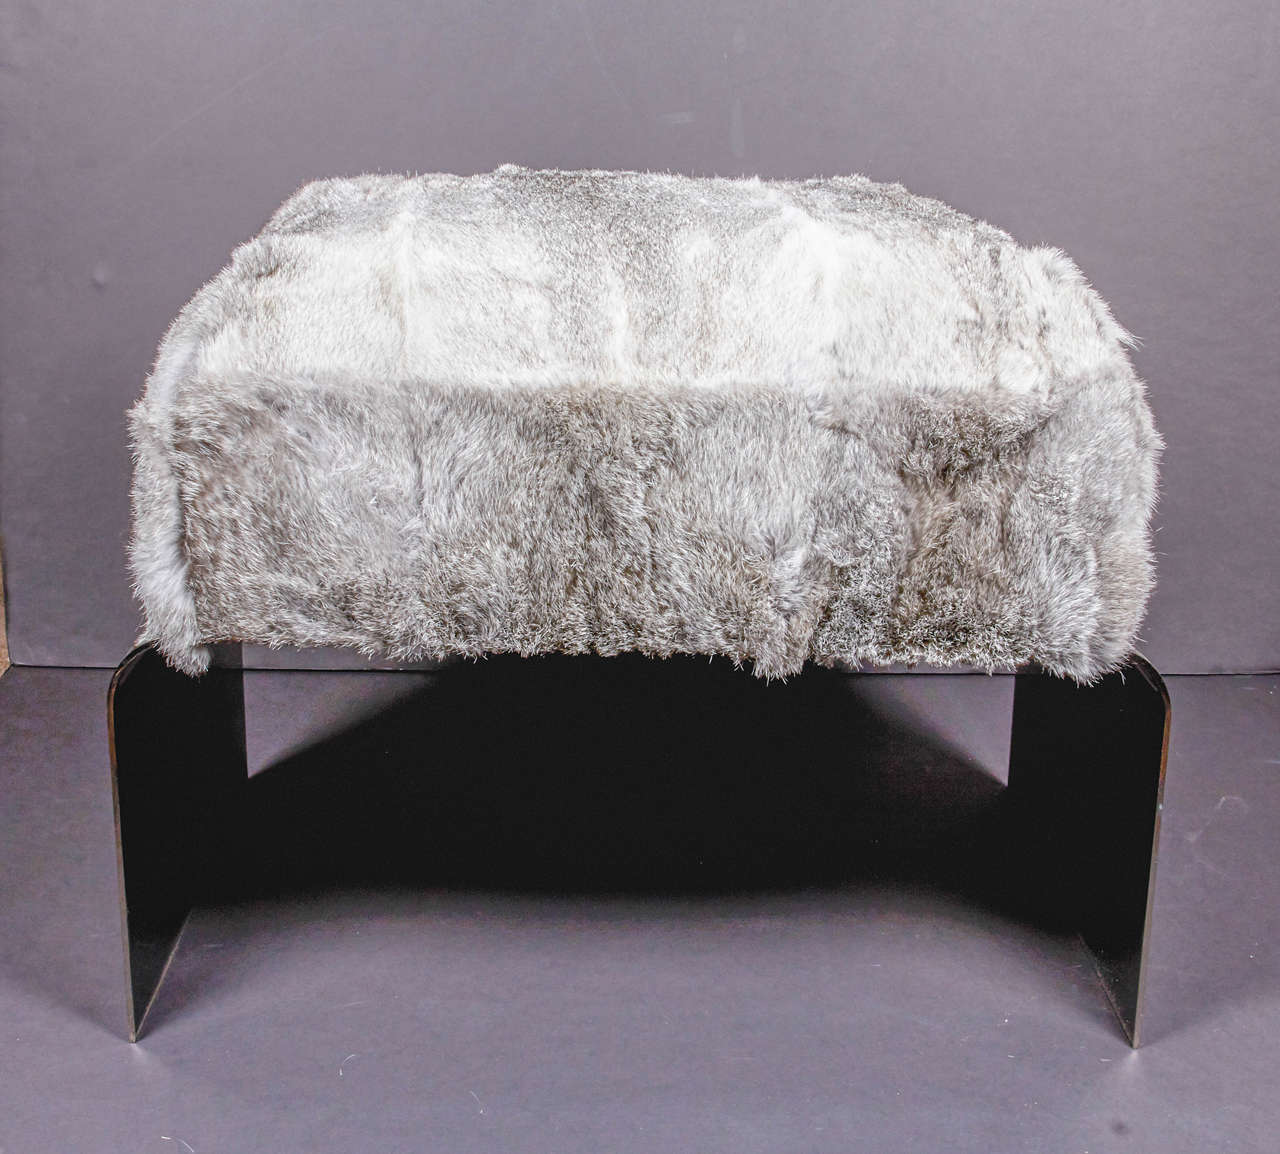 Contemporary Rabbit Fur Luxury Ottoman Bench with Steel Base in Black Nickel For Sale